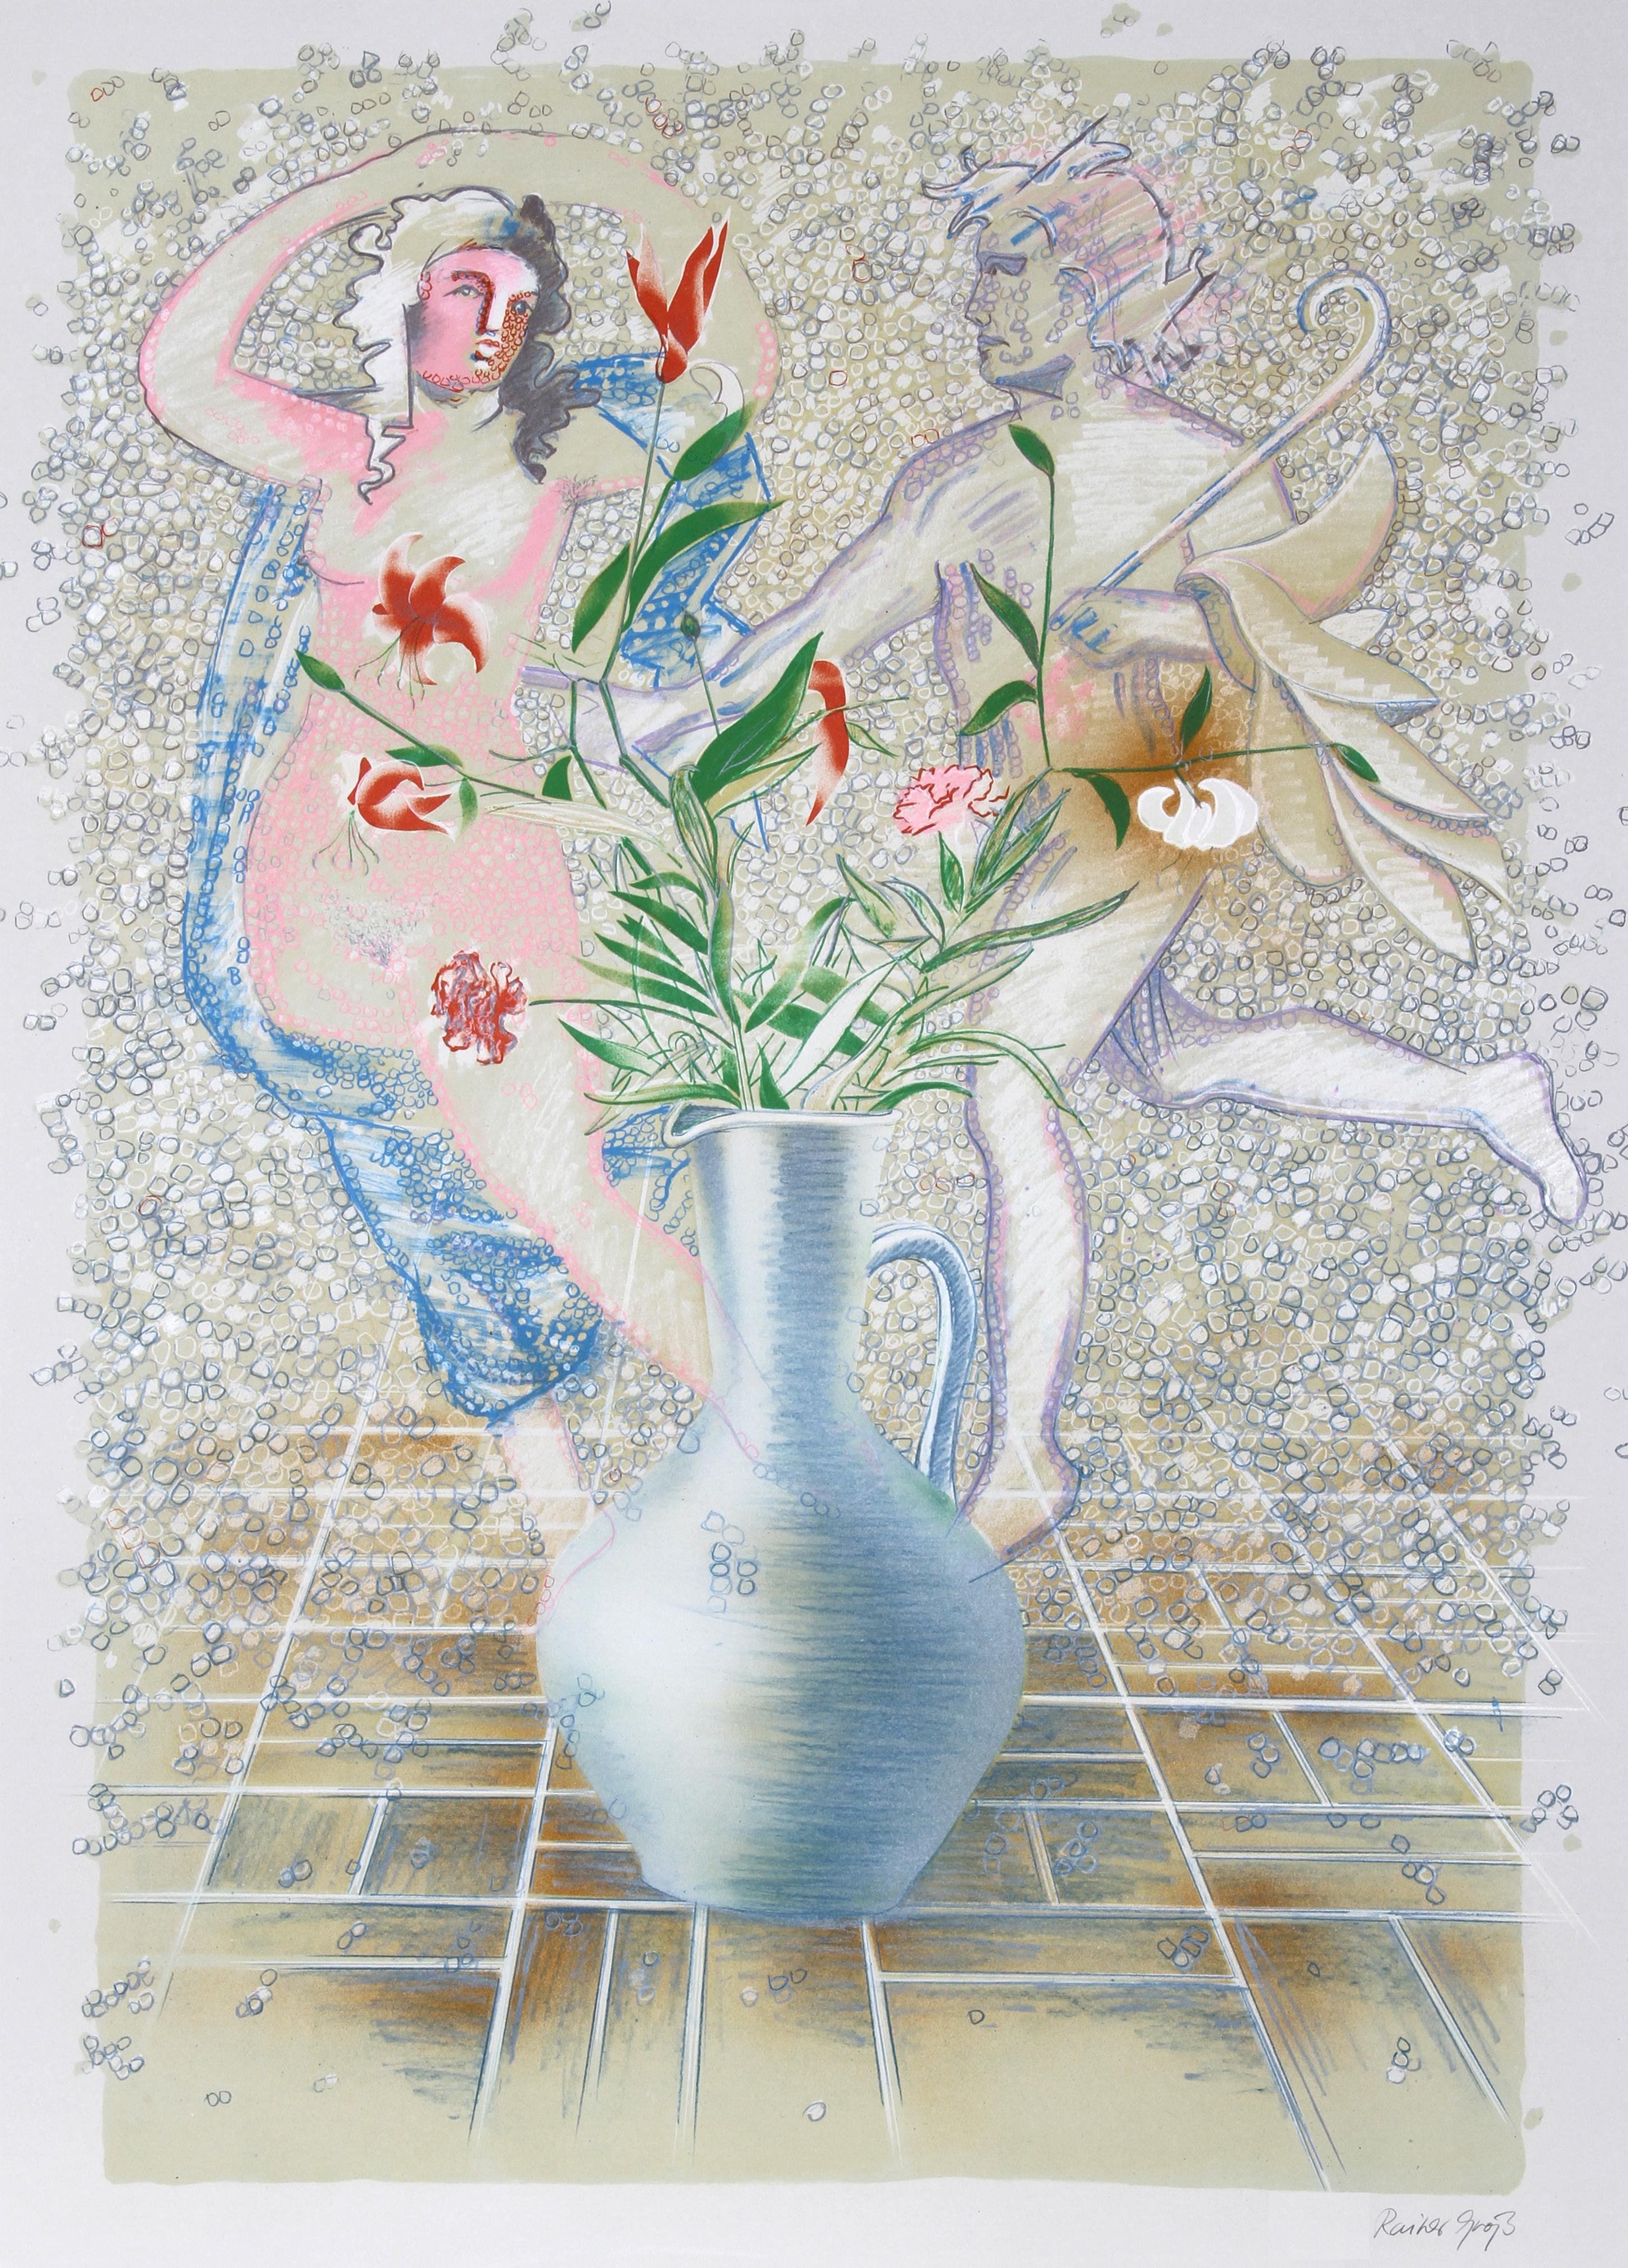 Lilies, Carnations & Stones by Rainer Gross, German (1951)
Date: circa 1980
Lithograph, signed and numbered in pencil
Edition of 200, AP 30
Size: 35.5 in. x 25.5 in. (90.17 cm x 64.77 cm)